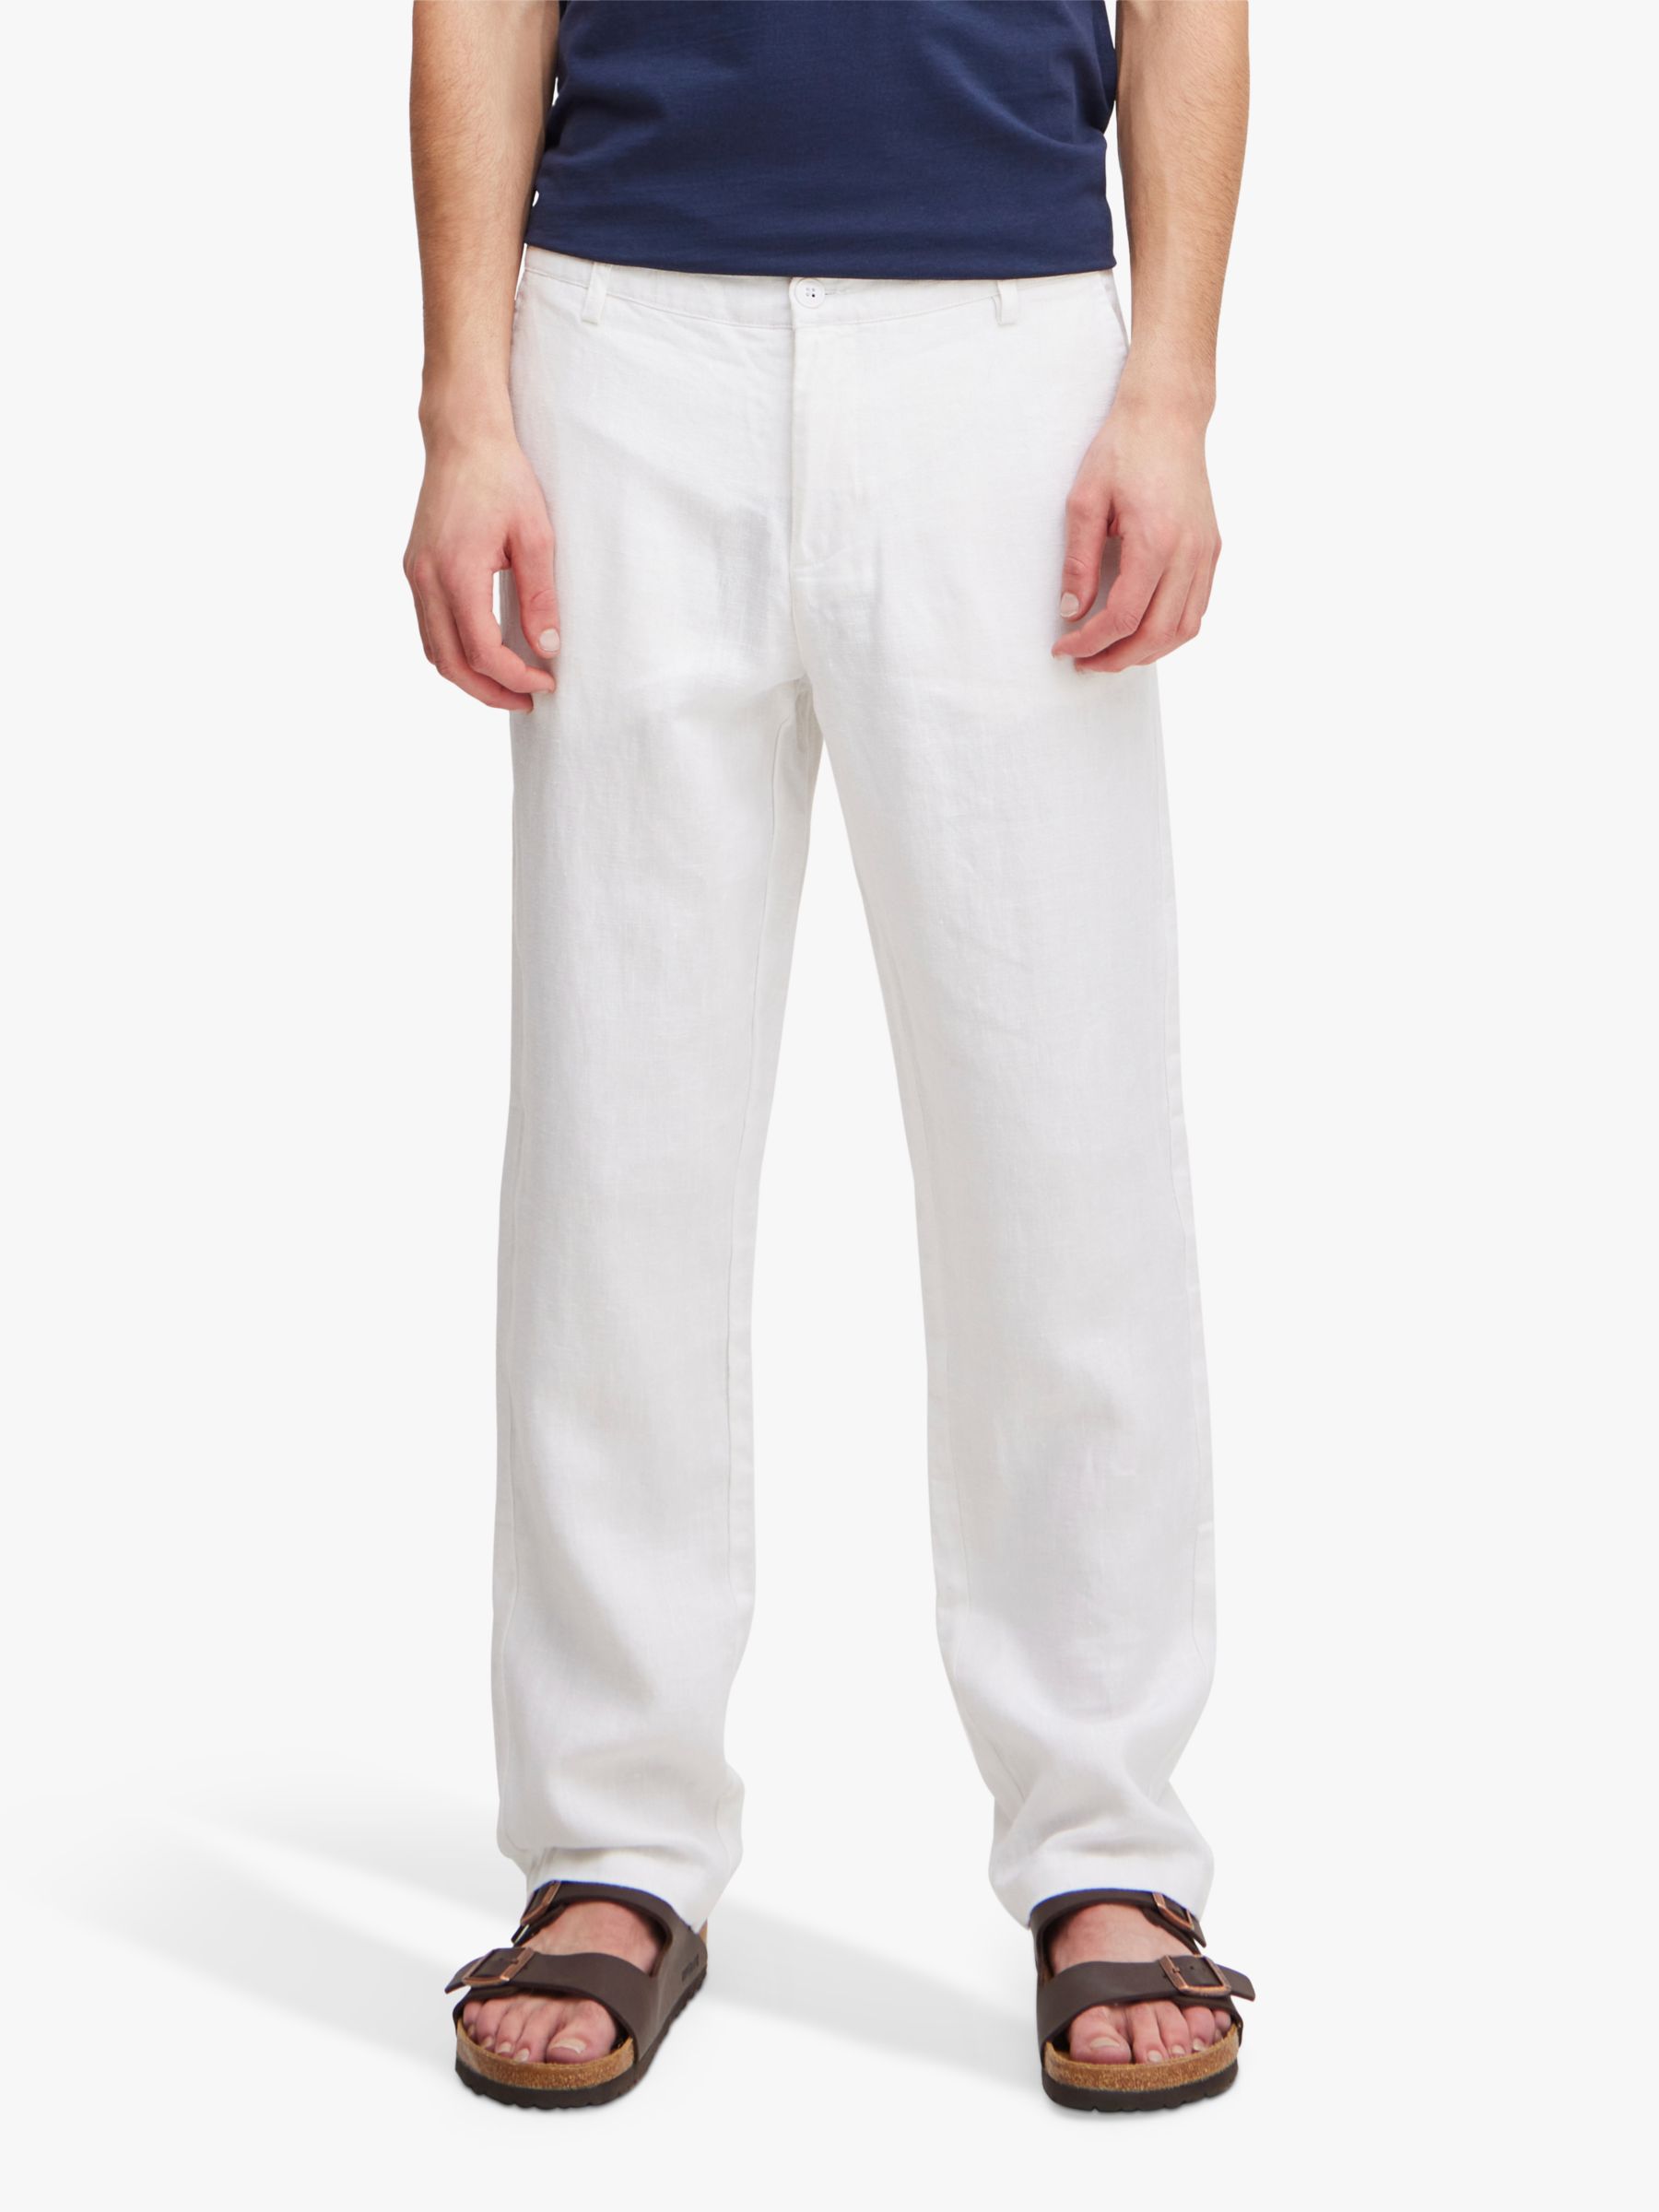 Casual Friday Pandrup Regular Fit Linen Trousers, Snow White, 28R